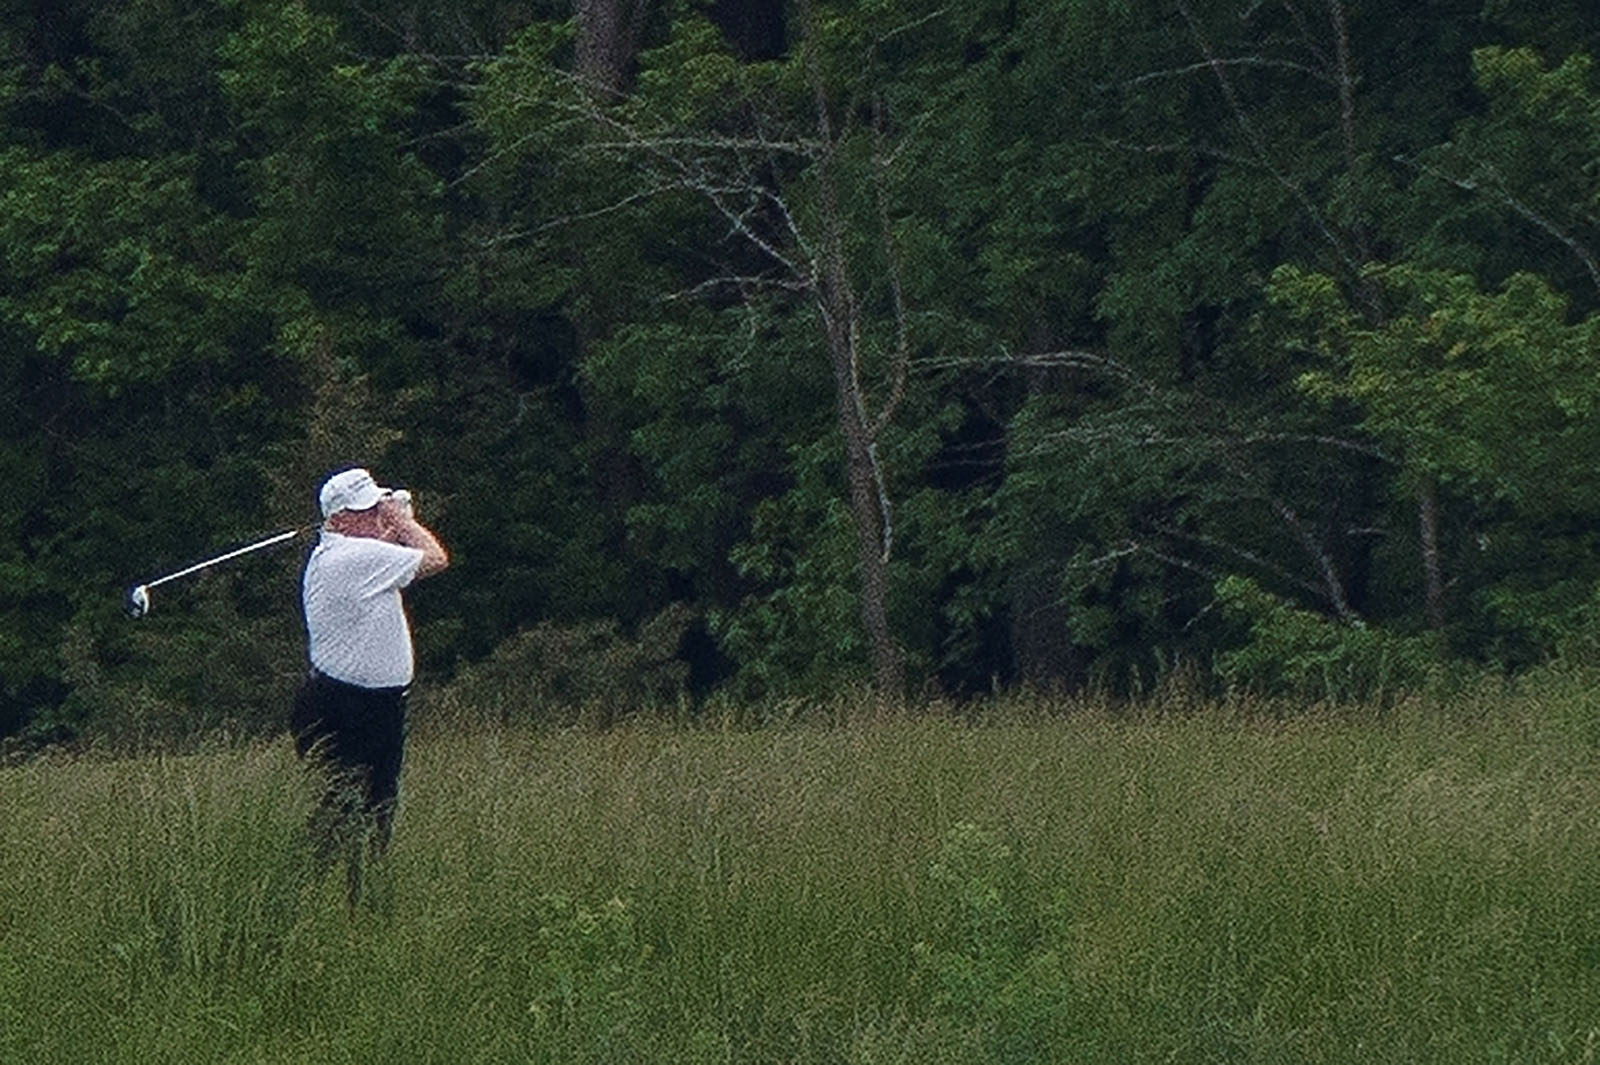 US. President Donald Trump swings a golf club during a round of golf, amid the COVID-19 outbreak, in Sterling, Virginia, U.S., May 24, 2020. Photo by Tom Brenner